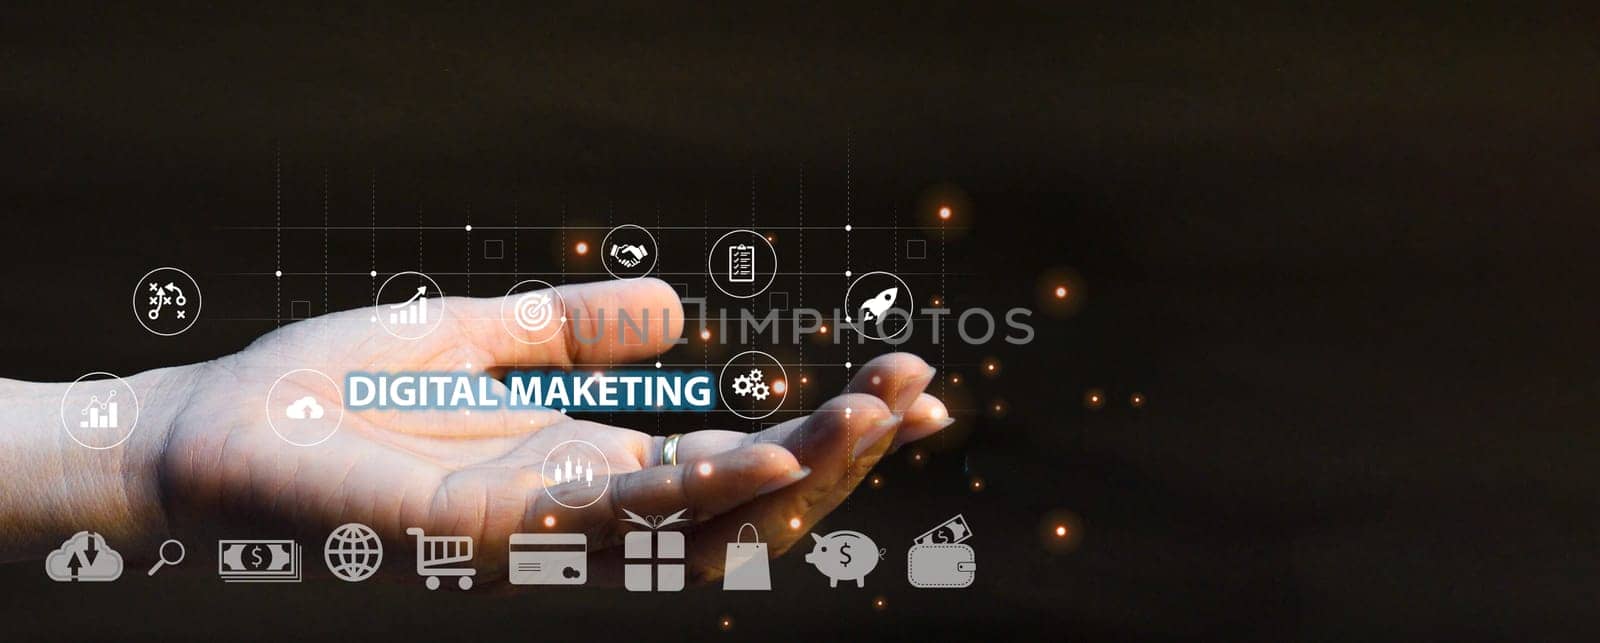 Hand showing signs and icons of digital marketing, internet advertising and business technology concept, online marketing, e-commerce online.